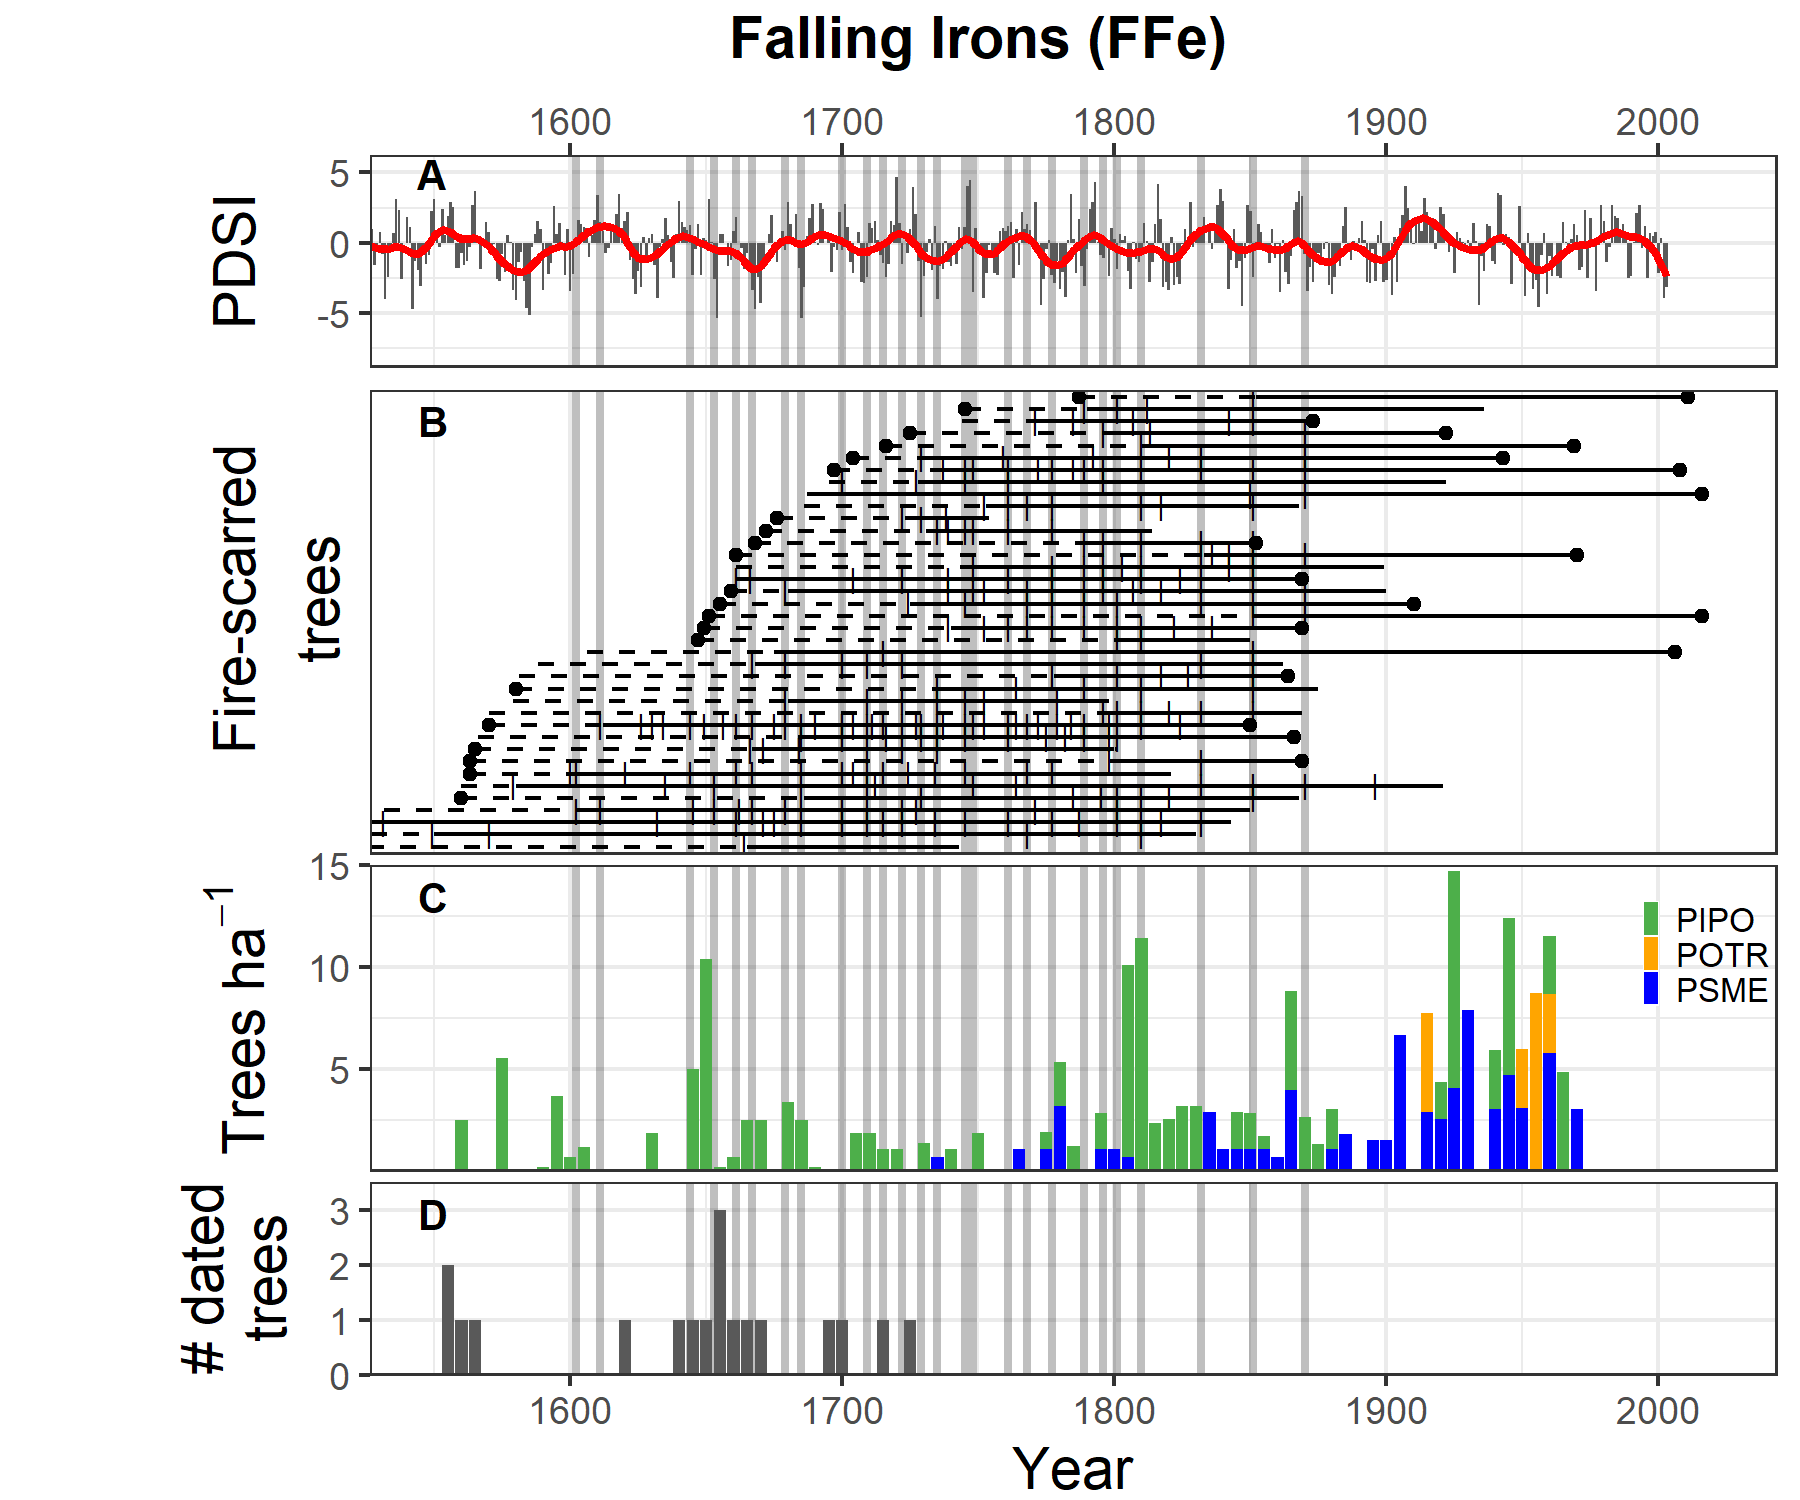 Comparison of climate, fire, and tree recruitment at Falling Irons. Panels include (A) tree-ring based PDSI, where positive values are wet and negative are dry; (B) fire-scarred trees, where each horizontal line represents a tree's lifespan with the solid portion showing the time period of reliable fire recording, the vertical dashed are fire scars, and triangles are other injuries; (C) tree recruitment in 5-yr bins (10 tph = ~ 4 tpa); and (D) recruitment of trees from the site collected outside of plots for fire history or chronology purposes. In all panels, years of widespread fires (>25% trees scarred) are indicated with vertical grey bars.